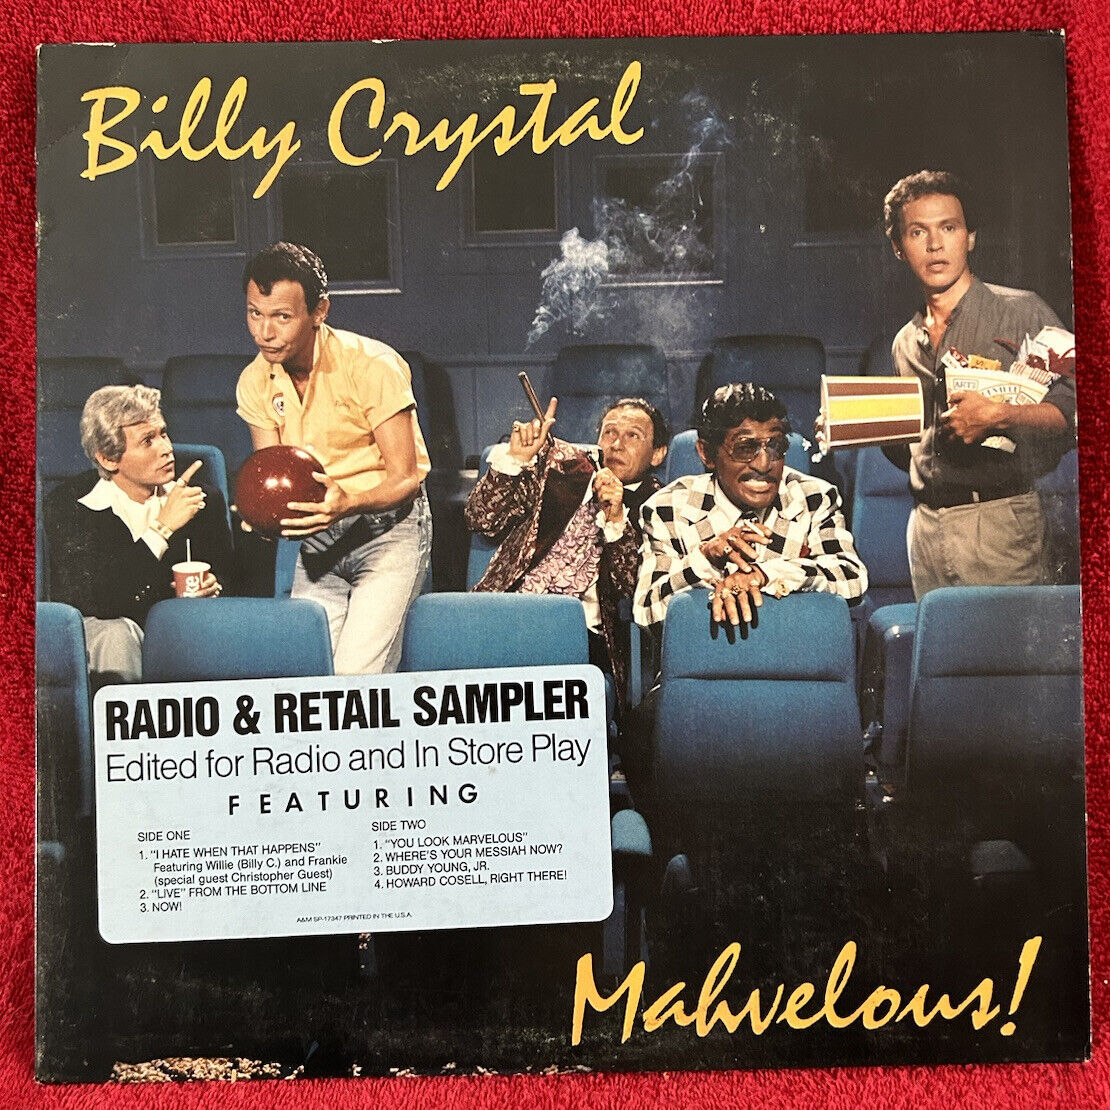 Billy Crystal: Marvelous 1985 A&M Records SP-5096 -WZZO Z-95 PROMO - Comedy